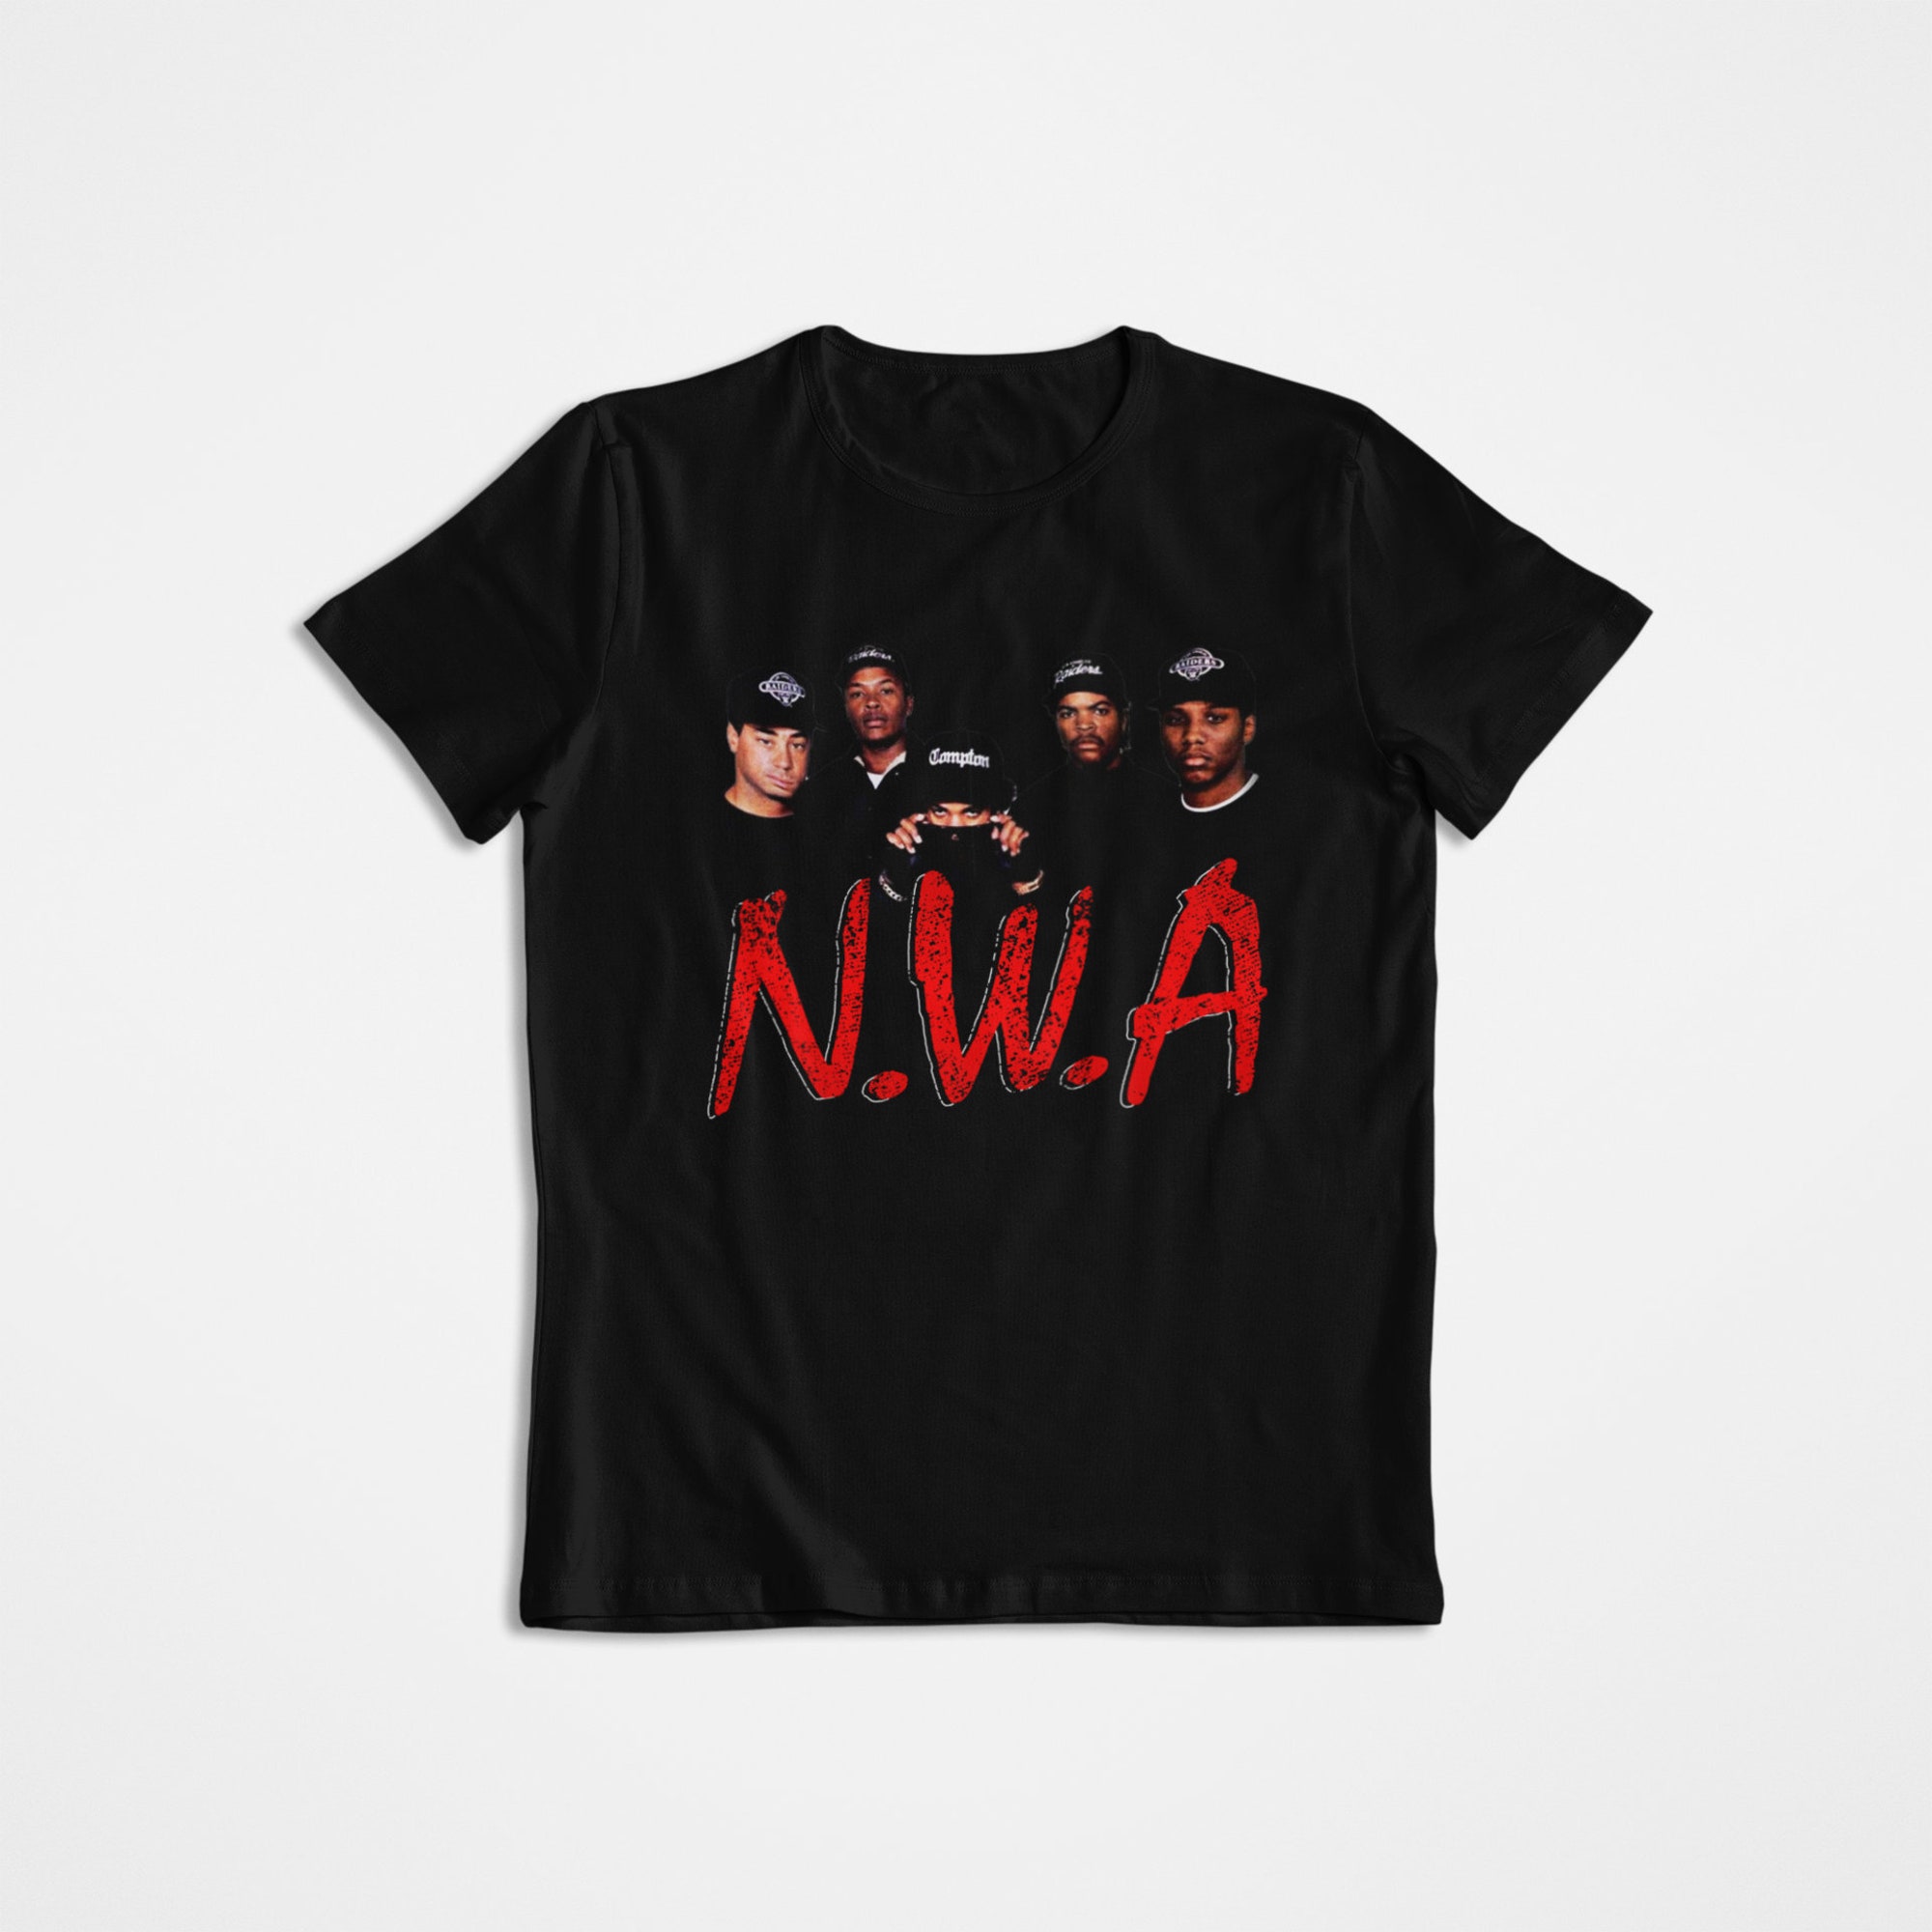 Vintage Graphic T-Shirt, Graphic Tee, Graphic Tee ~ NWA, Hip Hop